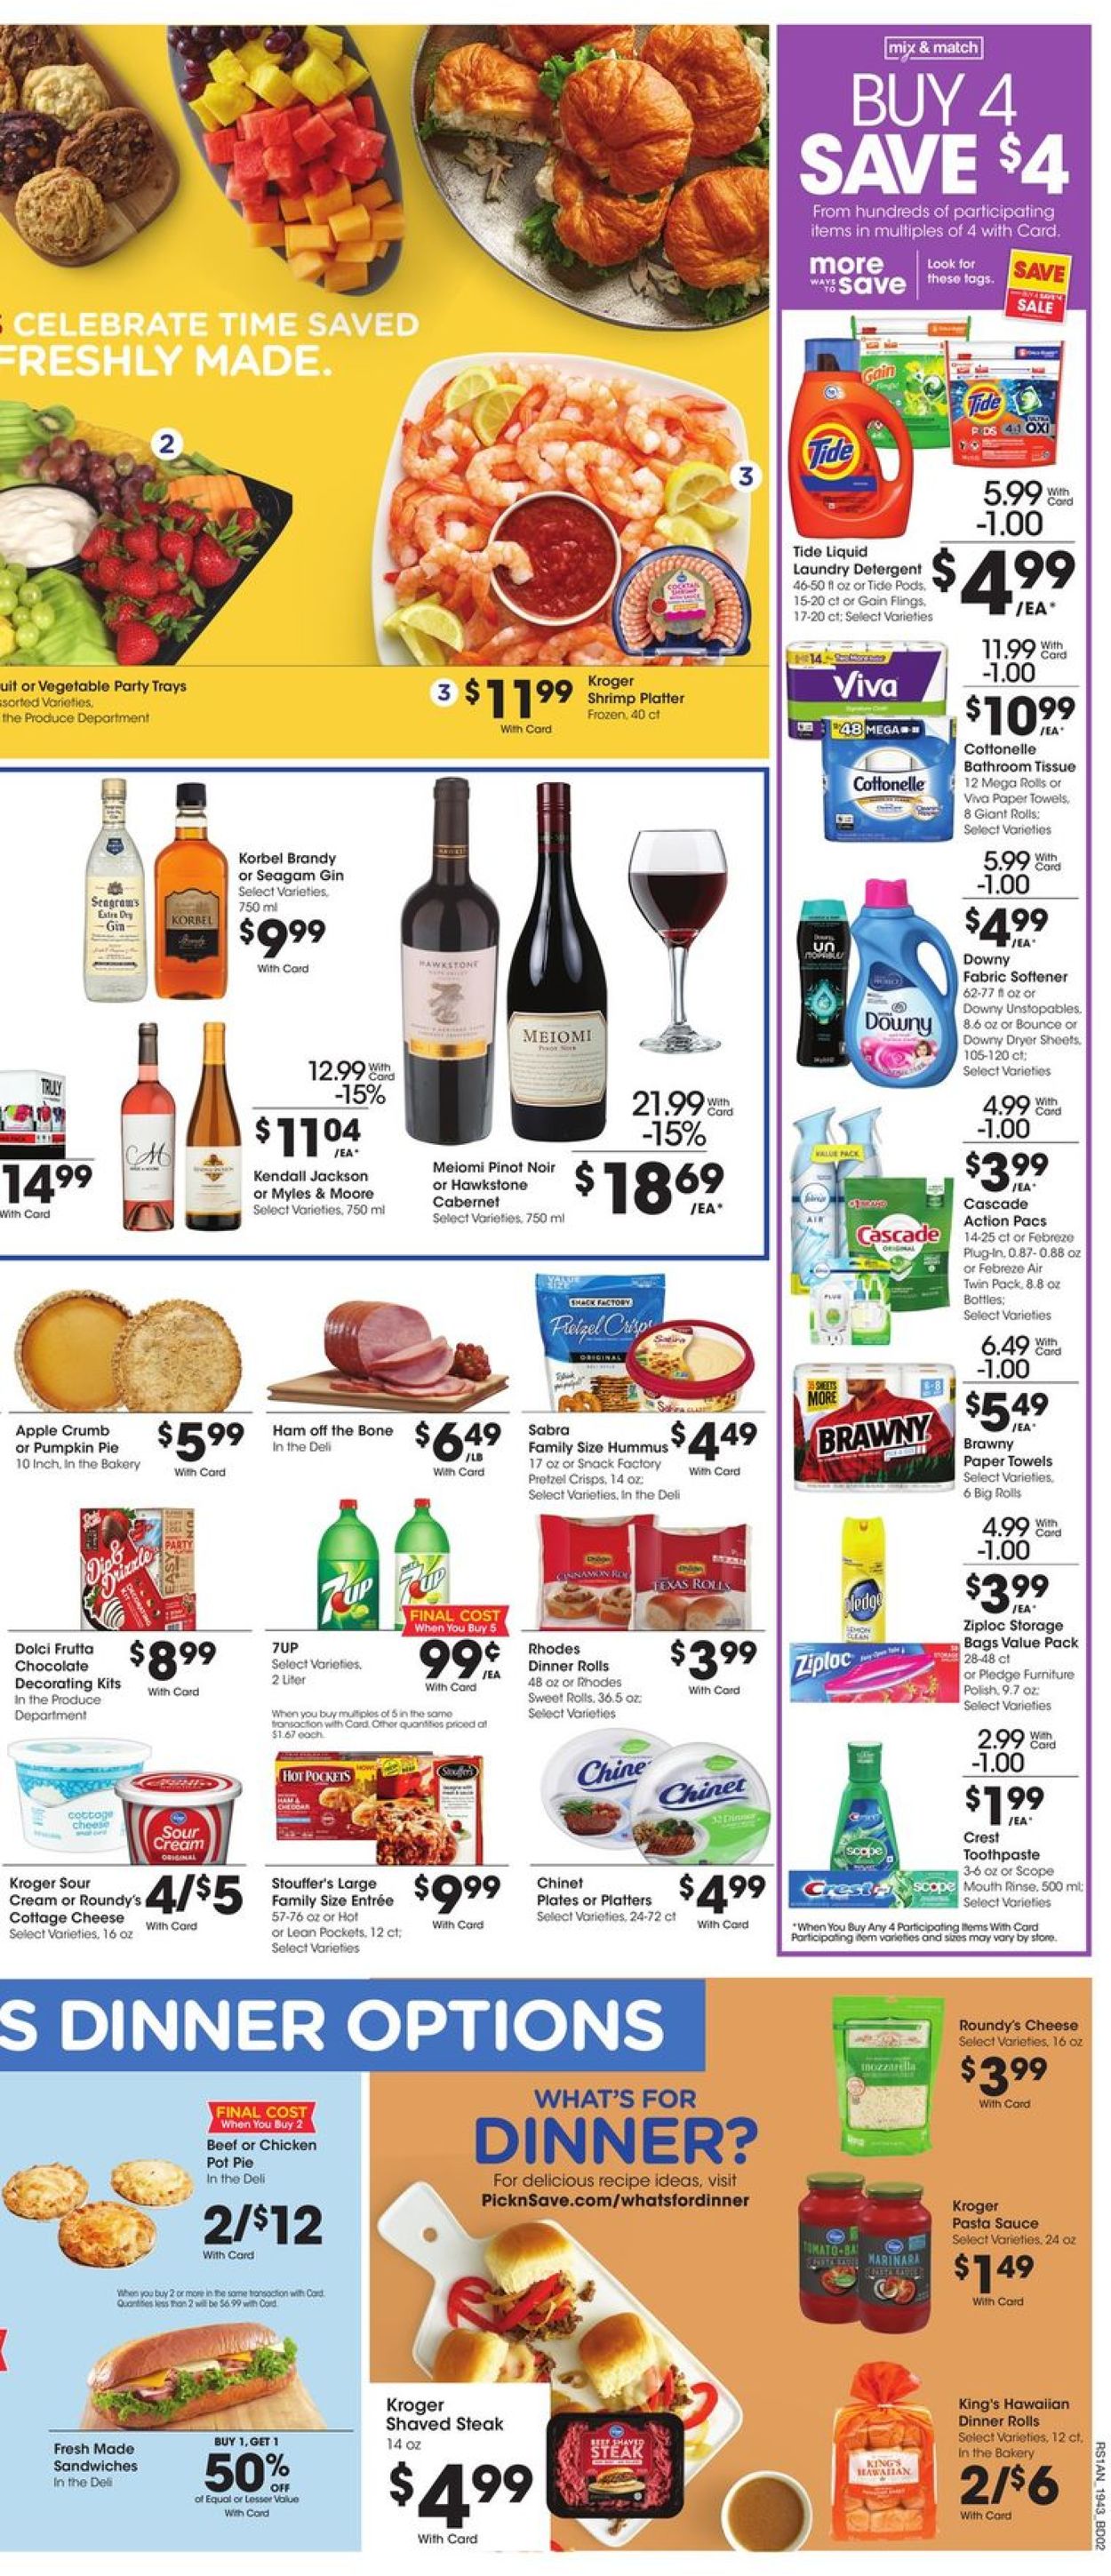 Catalogue Pick ‘n Save - Holiday Ad 2019 from 11/29/2019